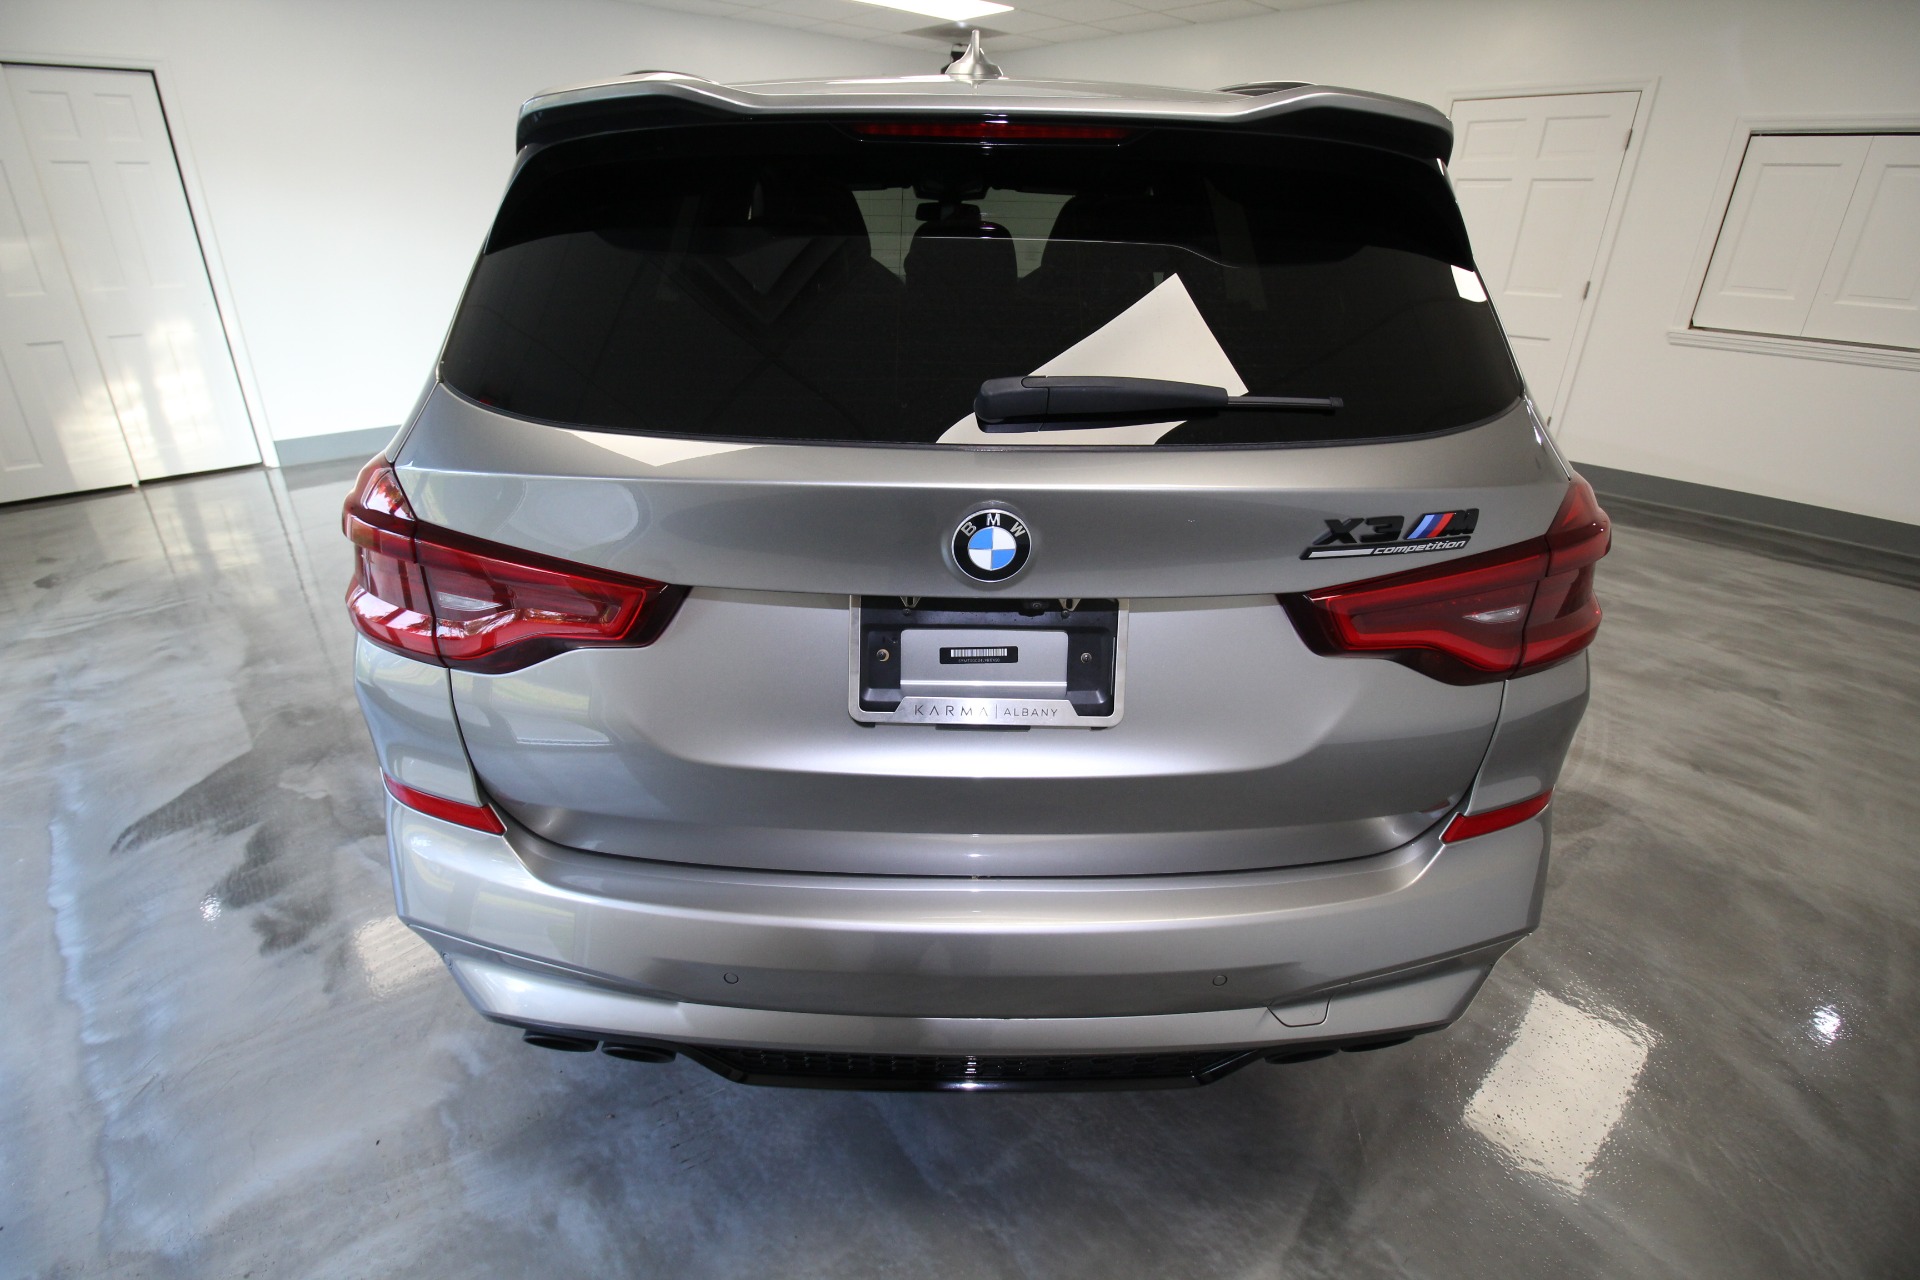 Used 2020 GREY BMW X3 M Competition LIKE NEW RARE COLOR GREY OVER ORANGE LOADED EXEC AND DRIV ASSIS | Albany, NY